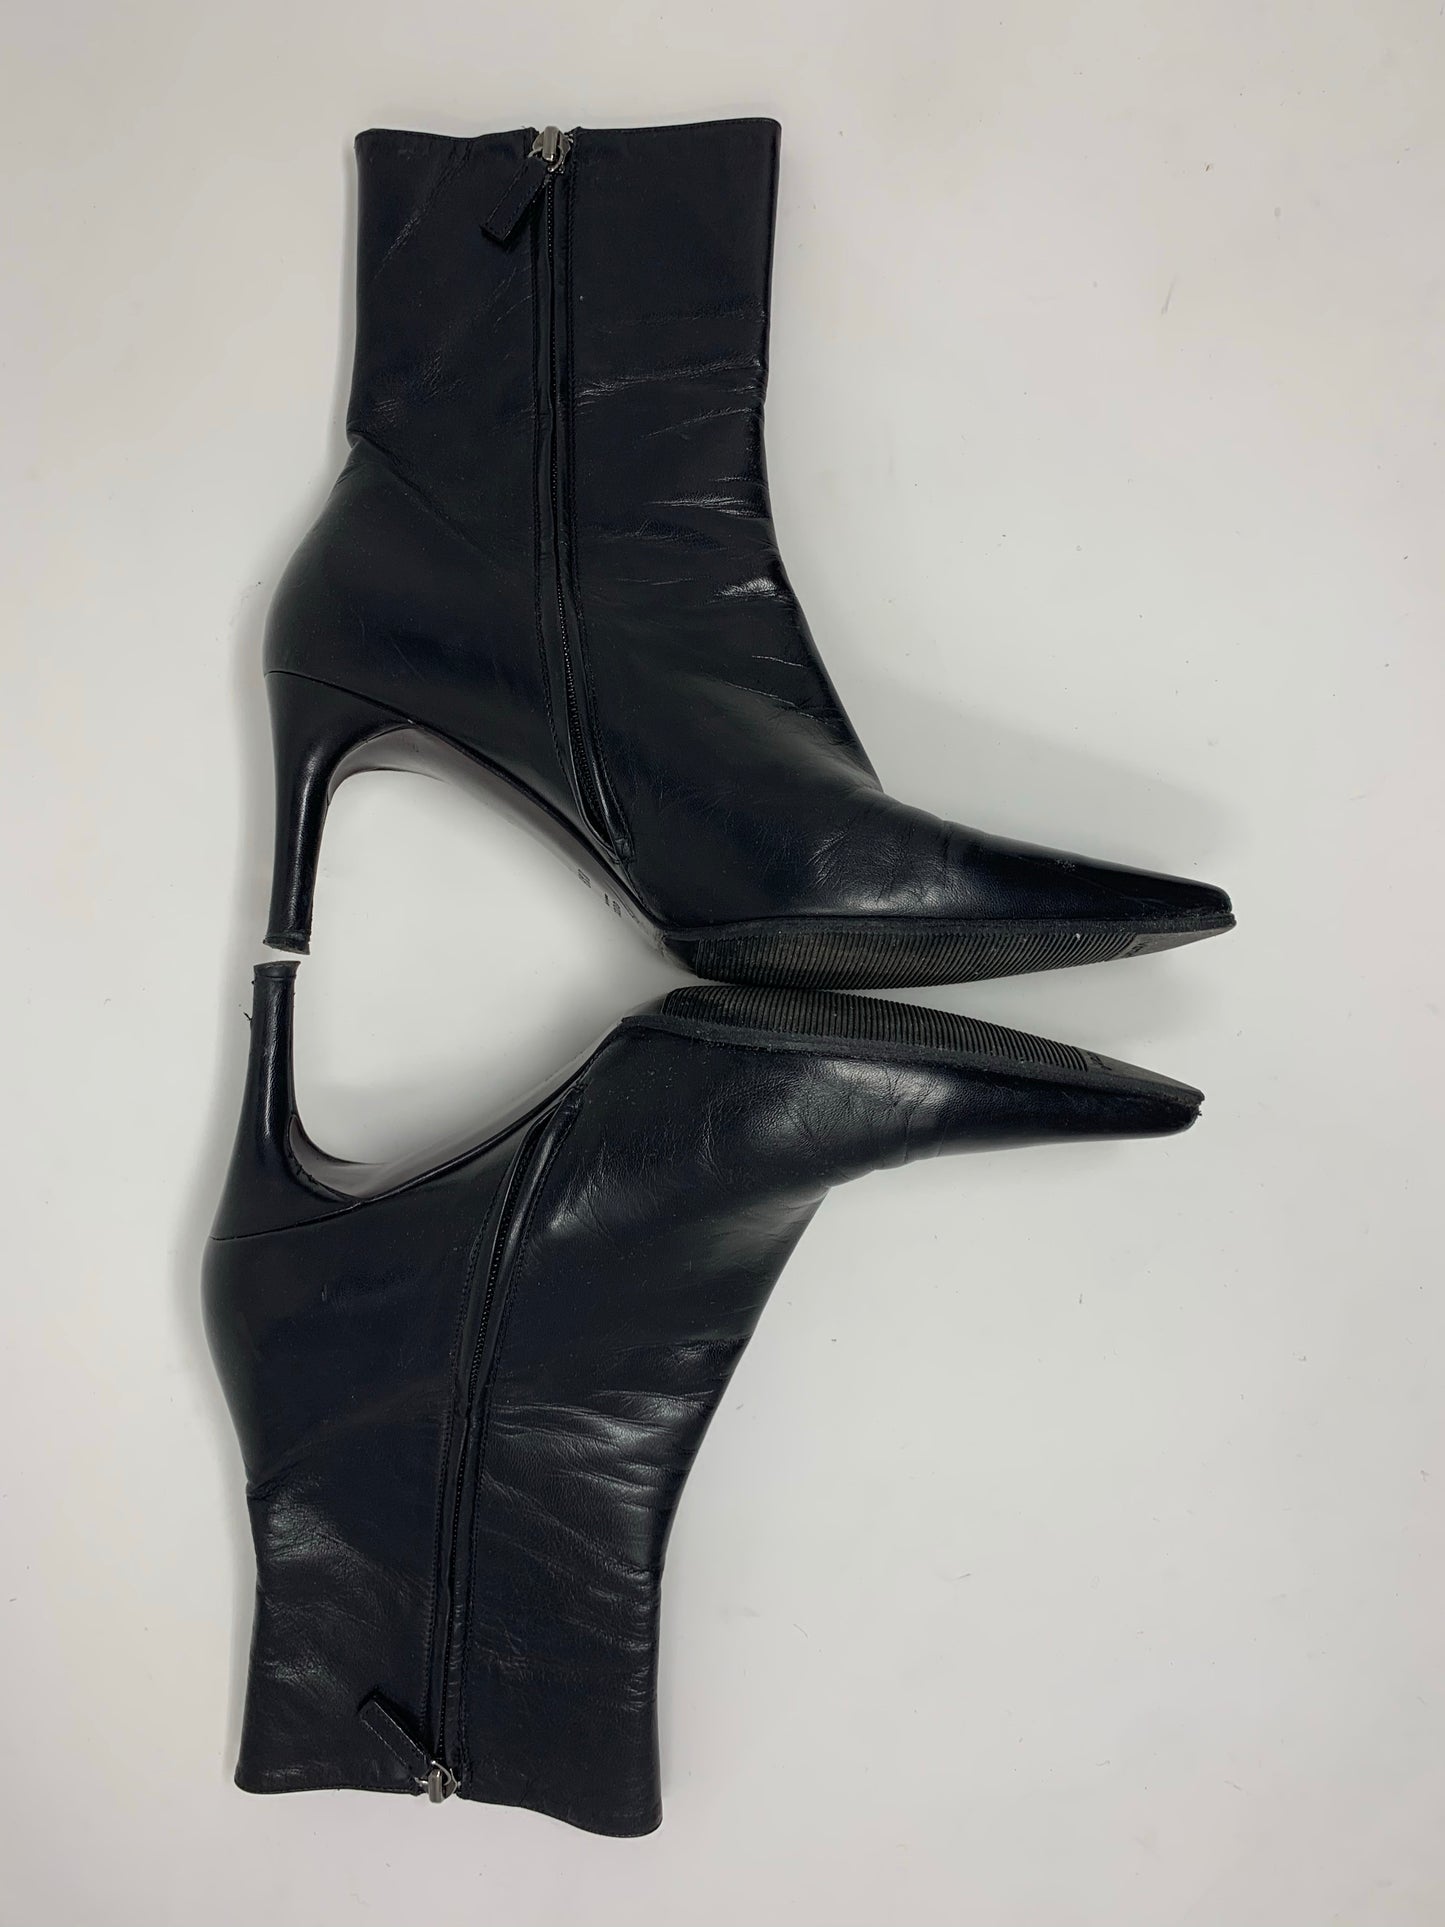 Gucci by Tom Ford Heeled Boots